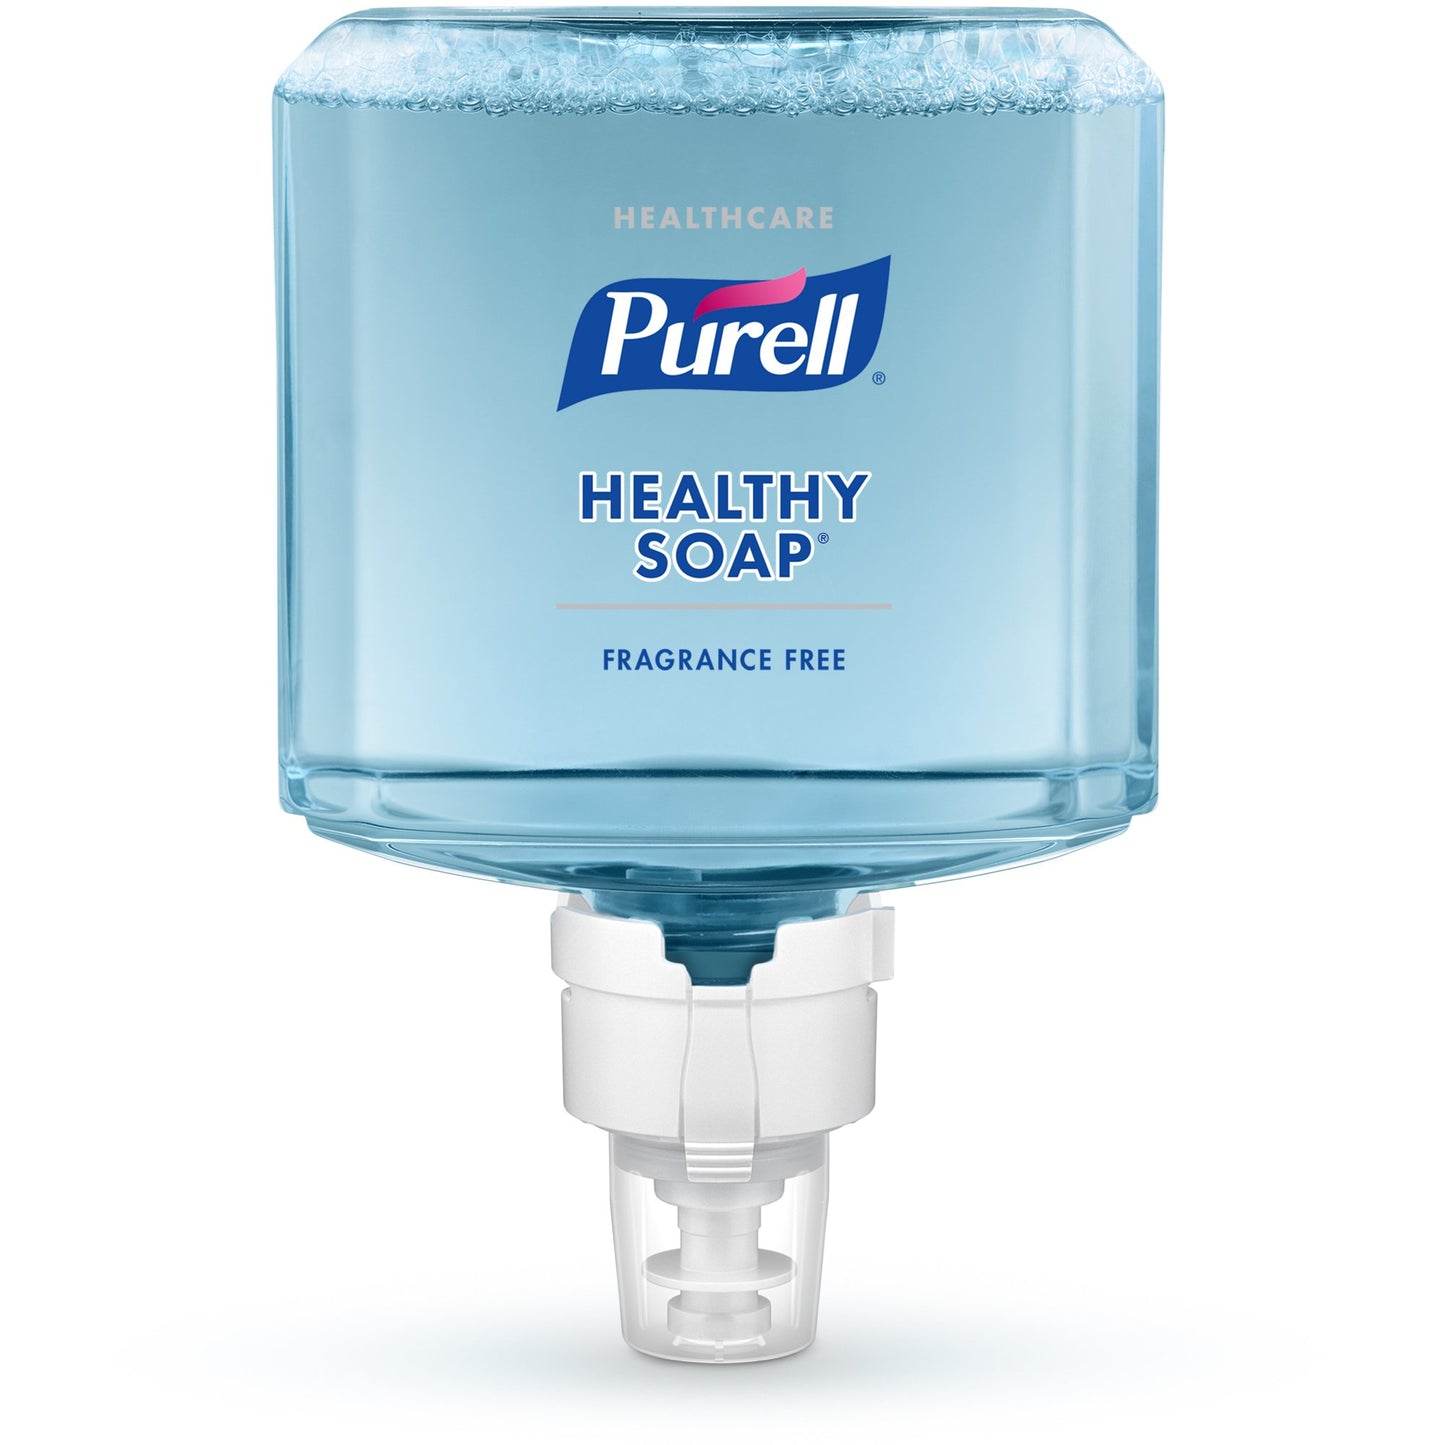 Purell Healthy Soap Gentle & Free